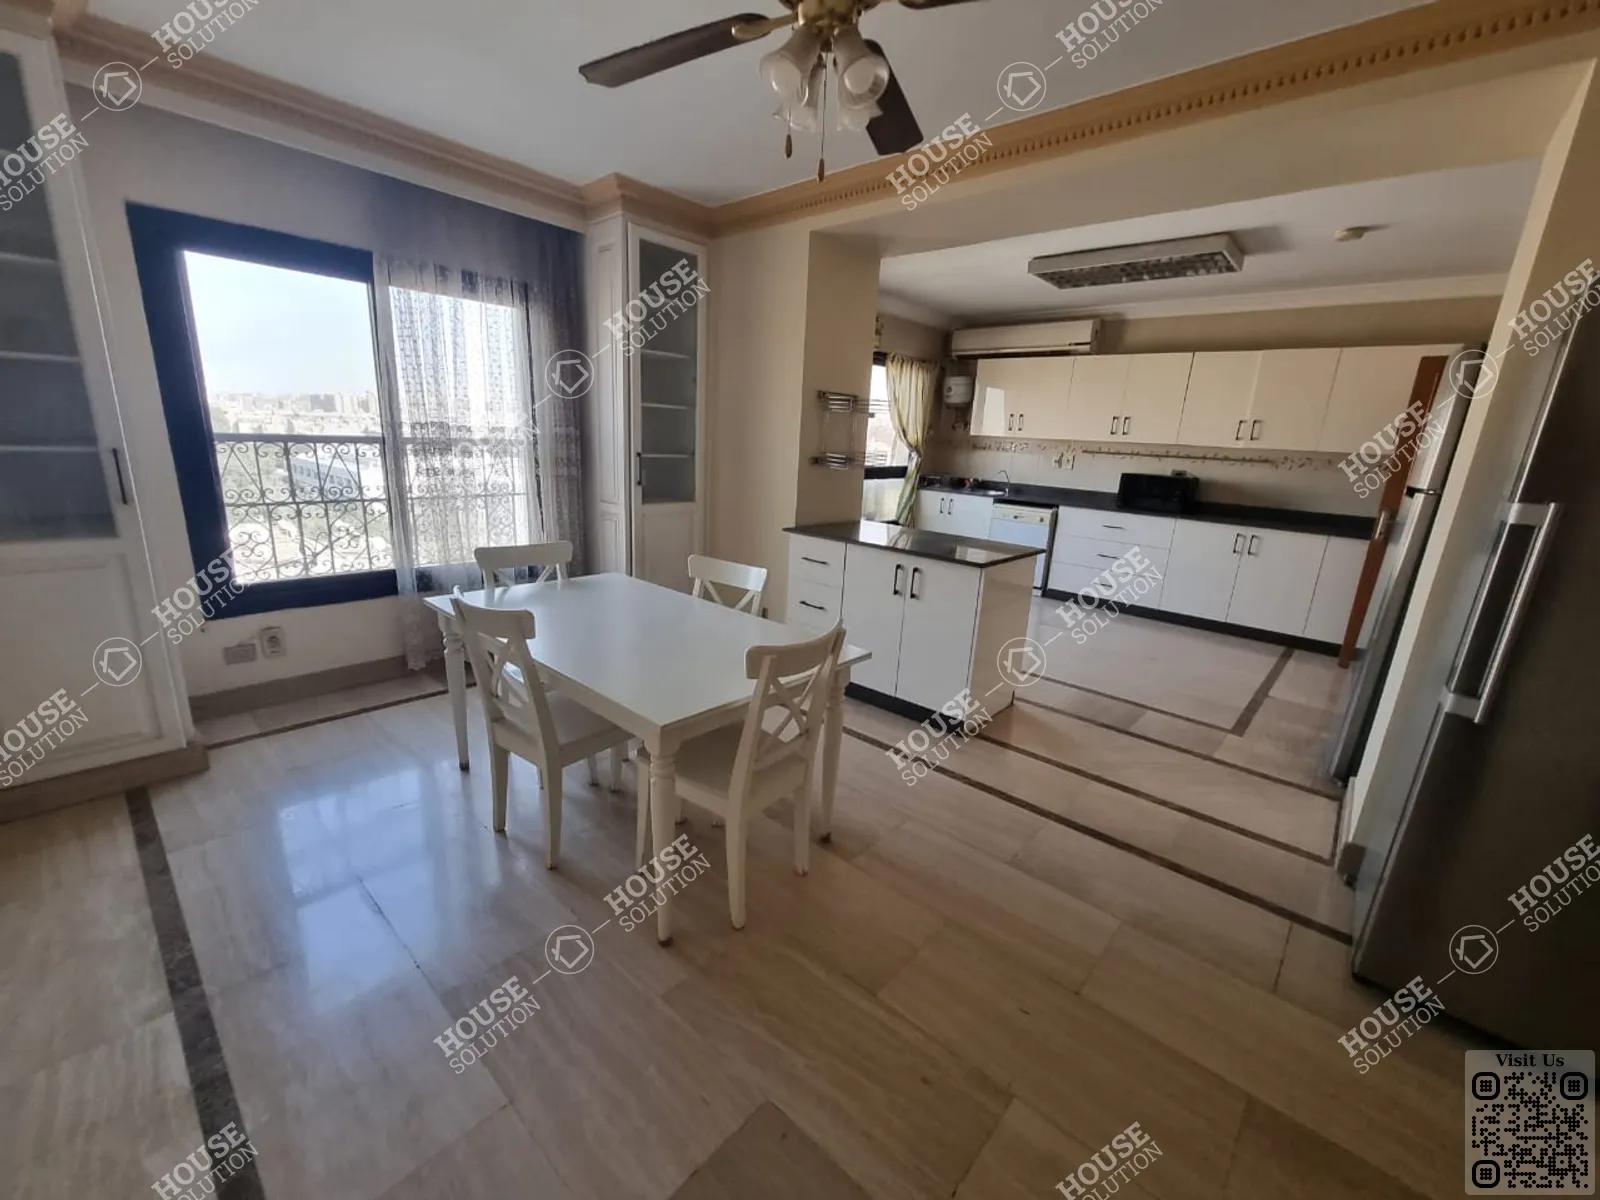 KITCHEN  @ Apartments For Rent In Maadi Maadi Degla Area: 260 m² consists of 3 Bedrooms 3 Bathrooms Modern furnished 5 stars #4327-2